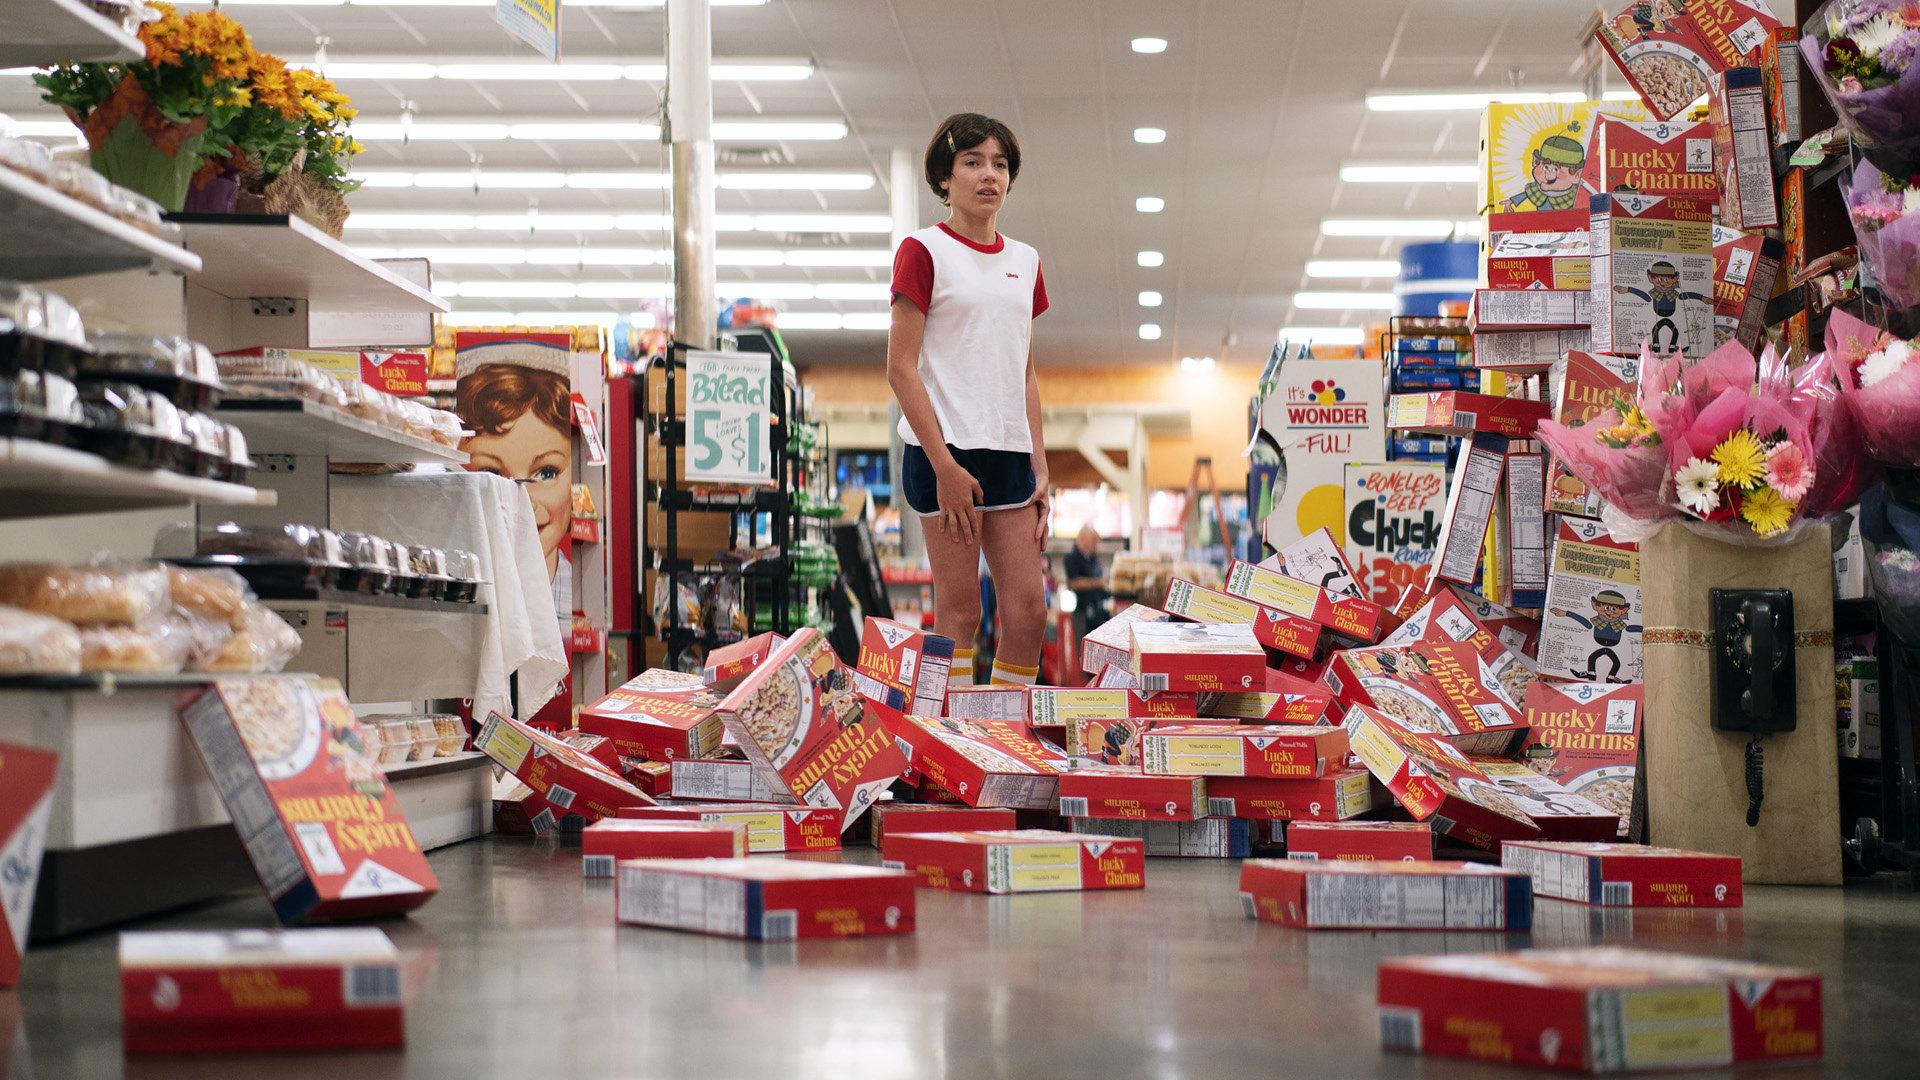 Photogrpahy of young girl in t-shirt and shorts looking at boxes of cereal fallen into a grocery aisle